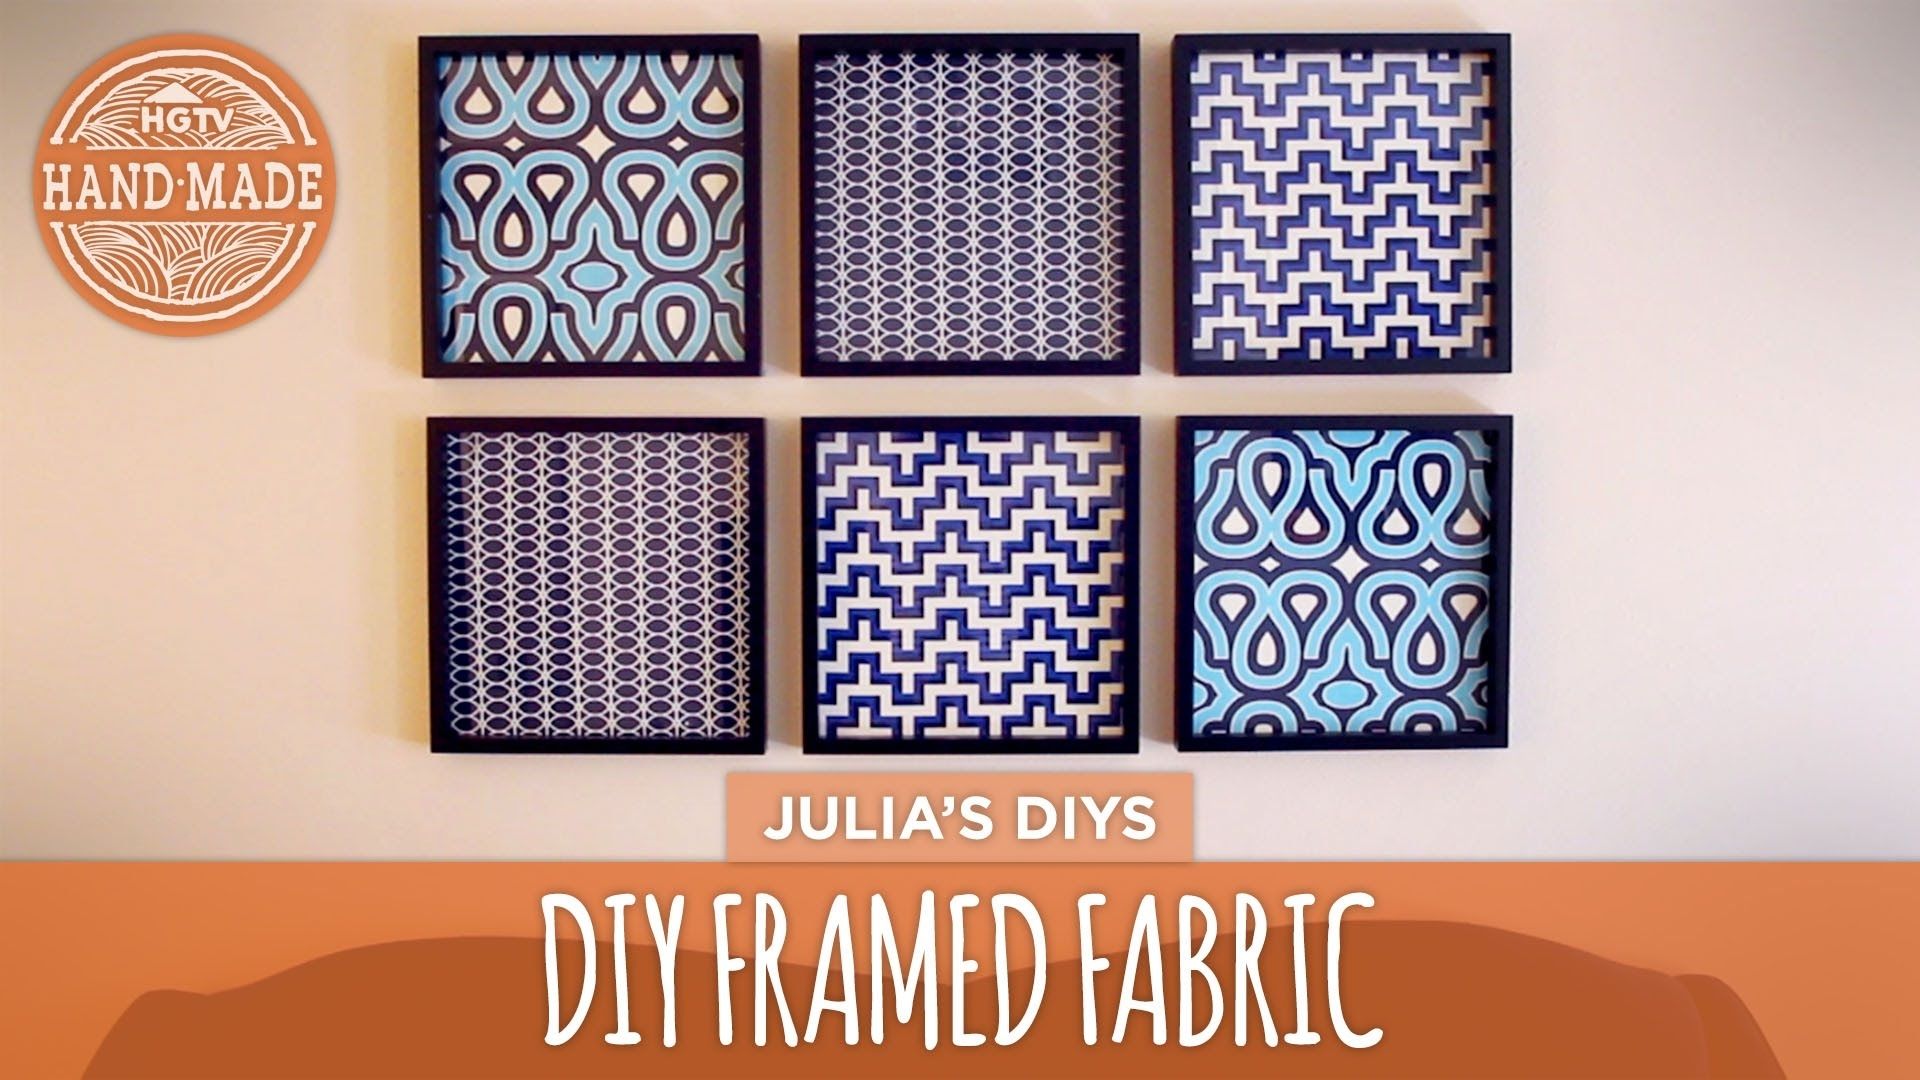 Diy Framed Fabric Gallery Wall – Hgtv Handmade – Youtube With Newest African Fabric Wall Art (View 1 of 15)